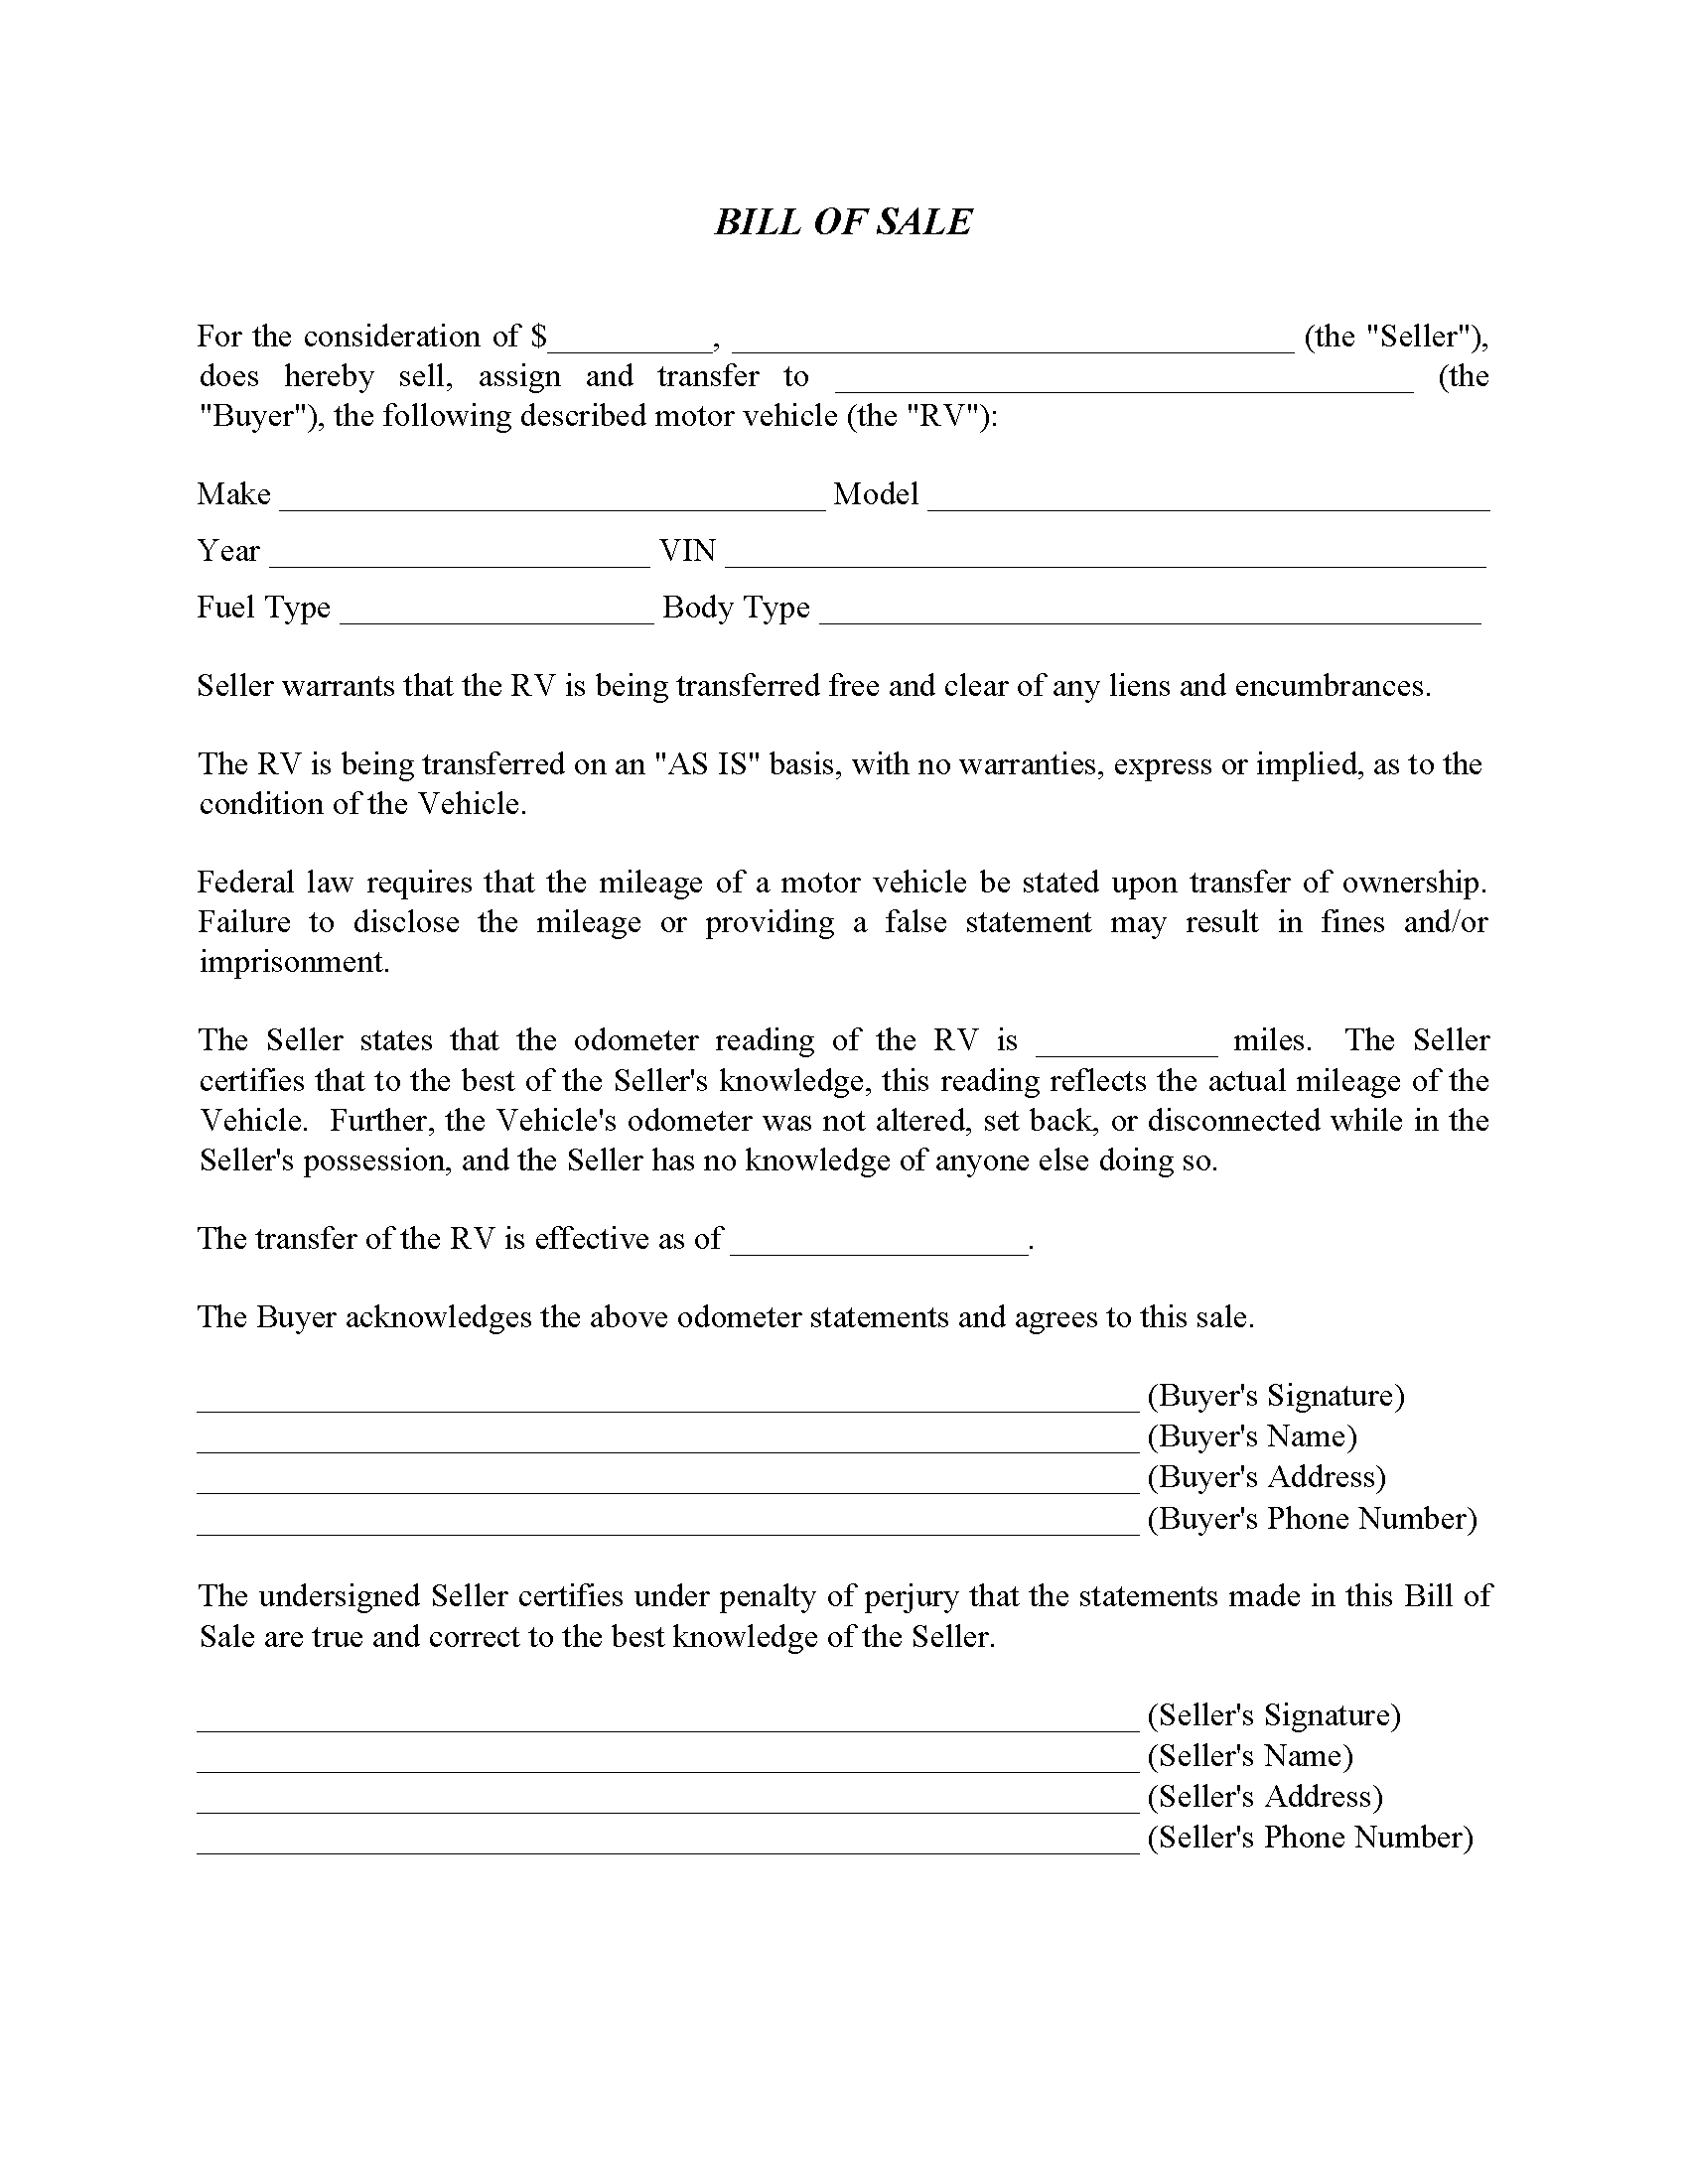 illinois-rv-bill-of-sale-form-free-printable-legal-forms